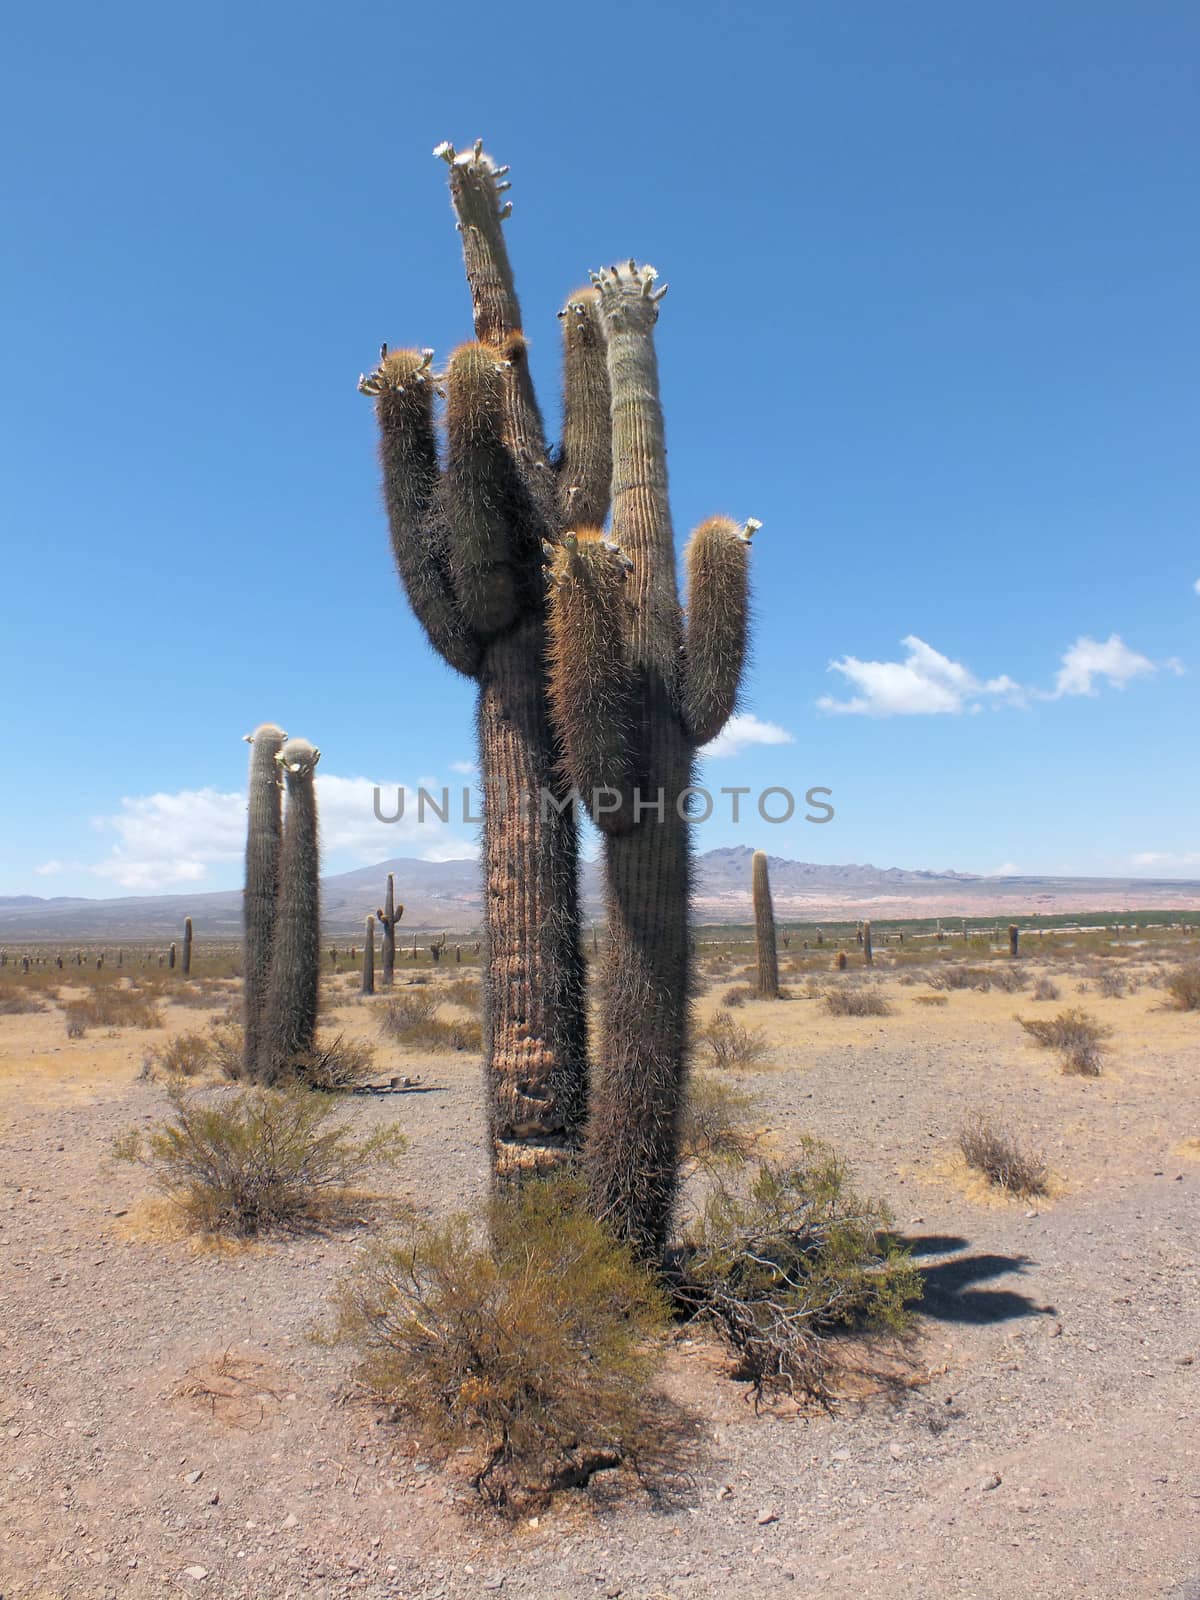 The Echinopsis atacamensis cactus has a tall columnar habit, sometimes forming branches and becoming treelike. It grows to about 33ft high, with stems to 28 inches across. The rose-white flowers are 4-5½  inches long, borne on the sides of the stems